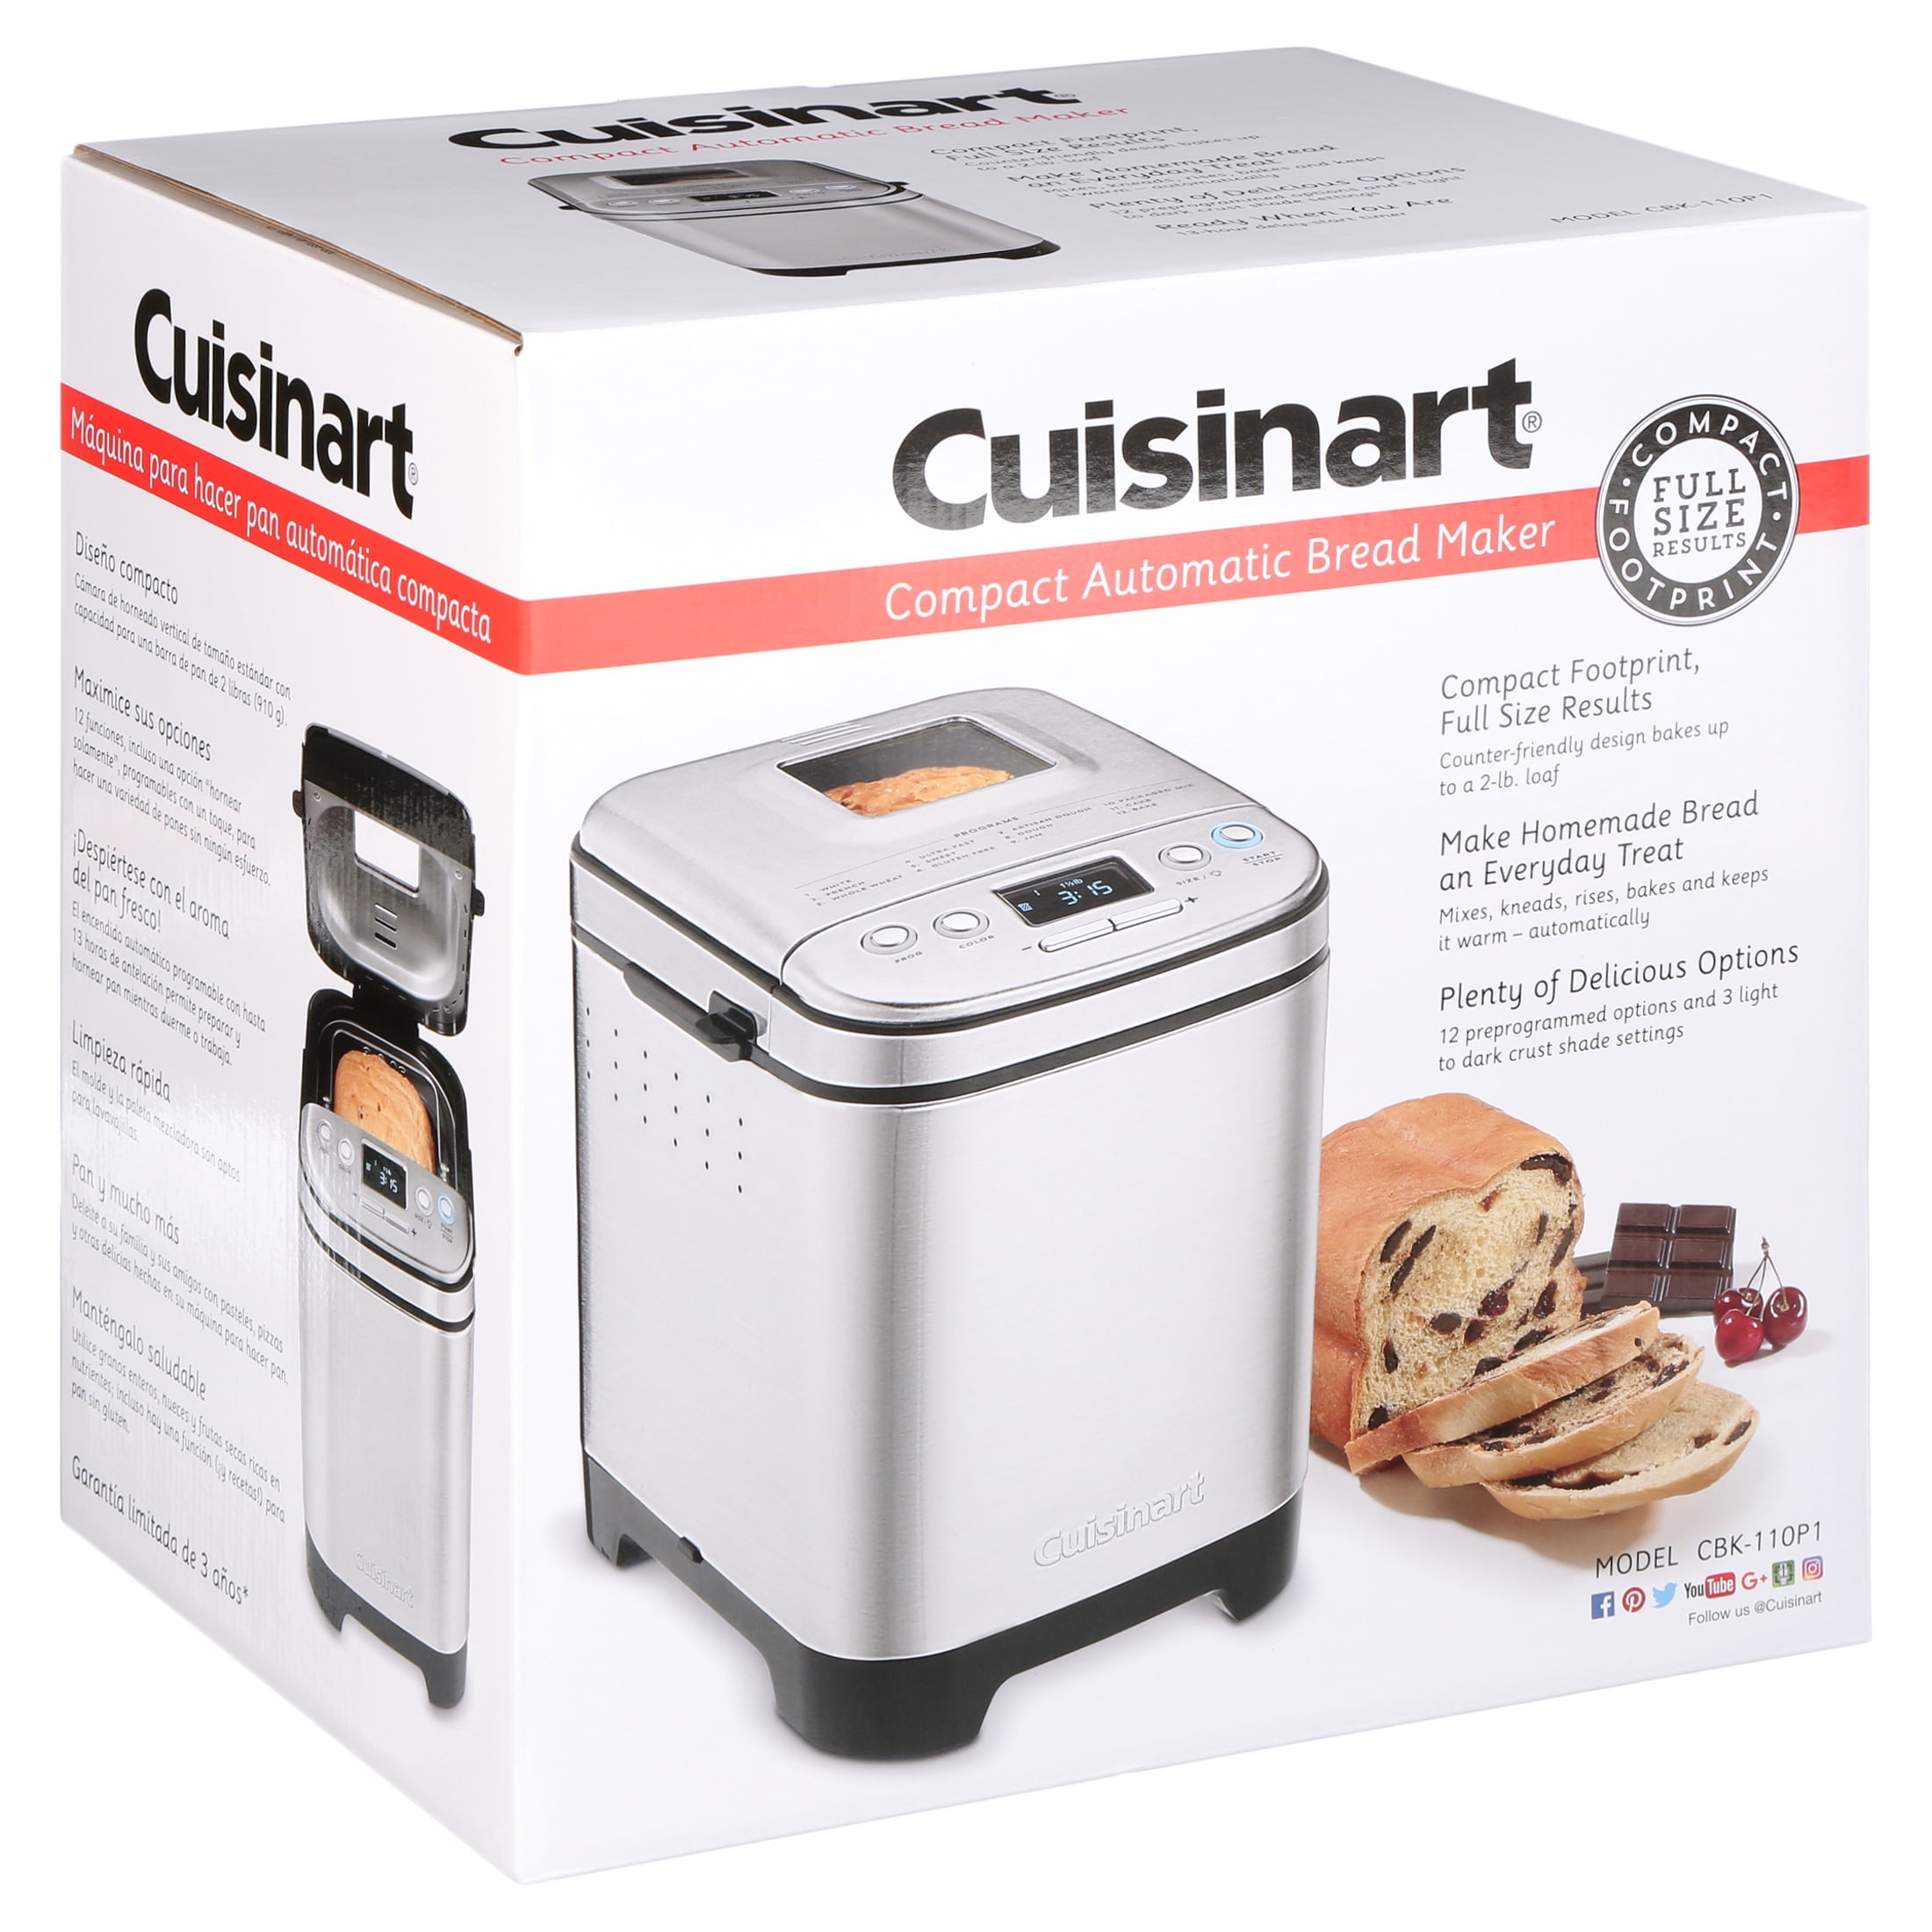 Cuisinart Compact Automatic bread maker review - The Gadgeteer